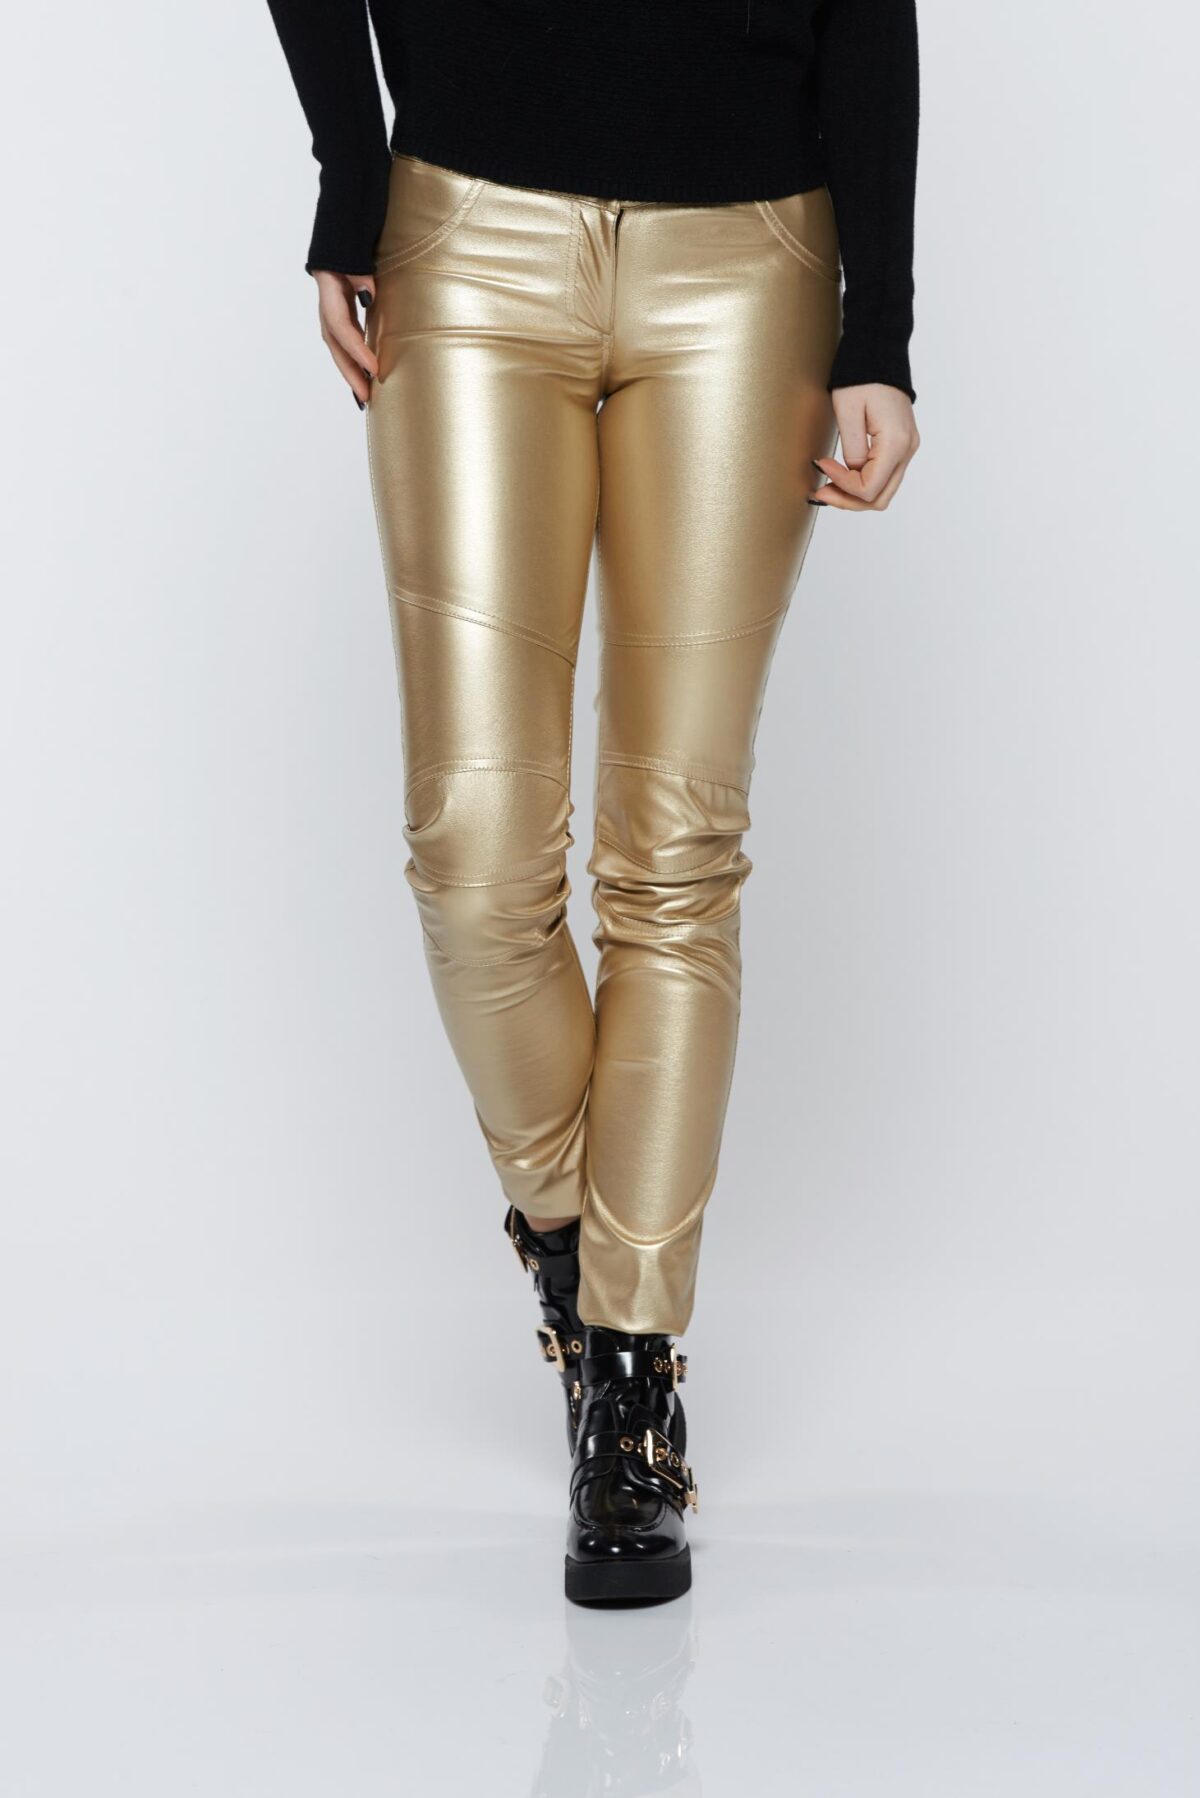 Gold Trousers Casual With Metallic Aspect With Medium Waist